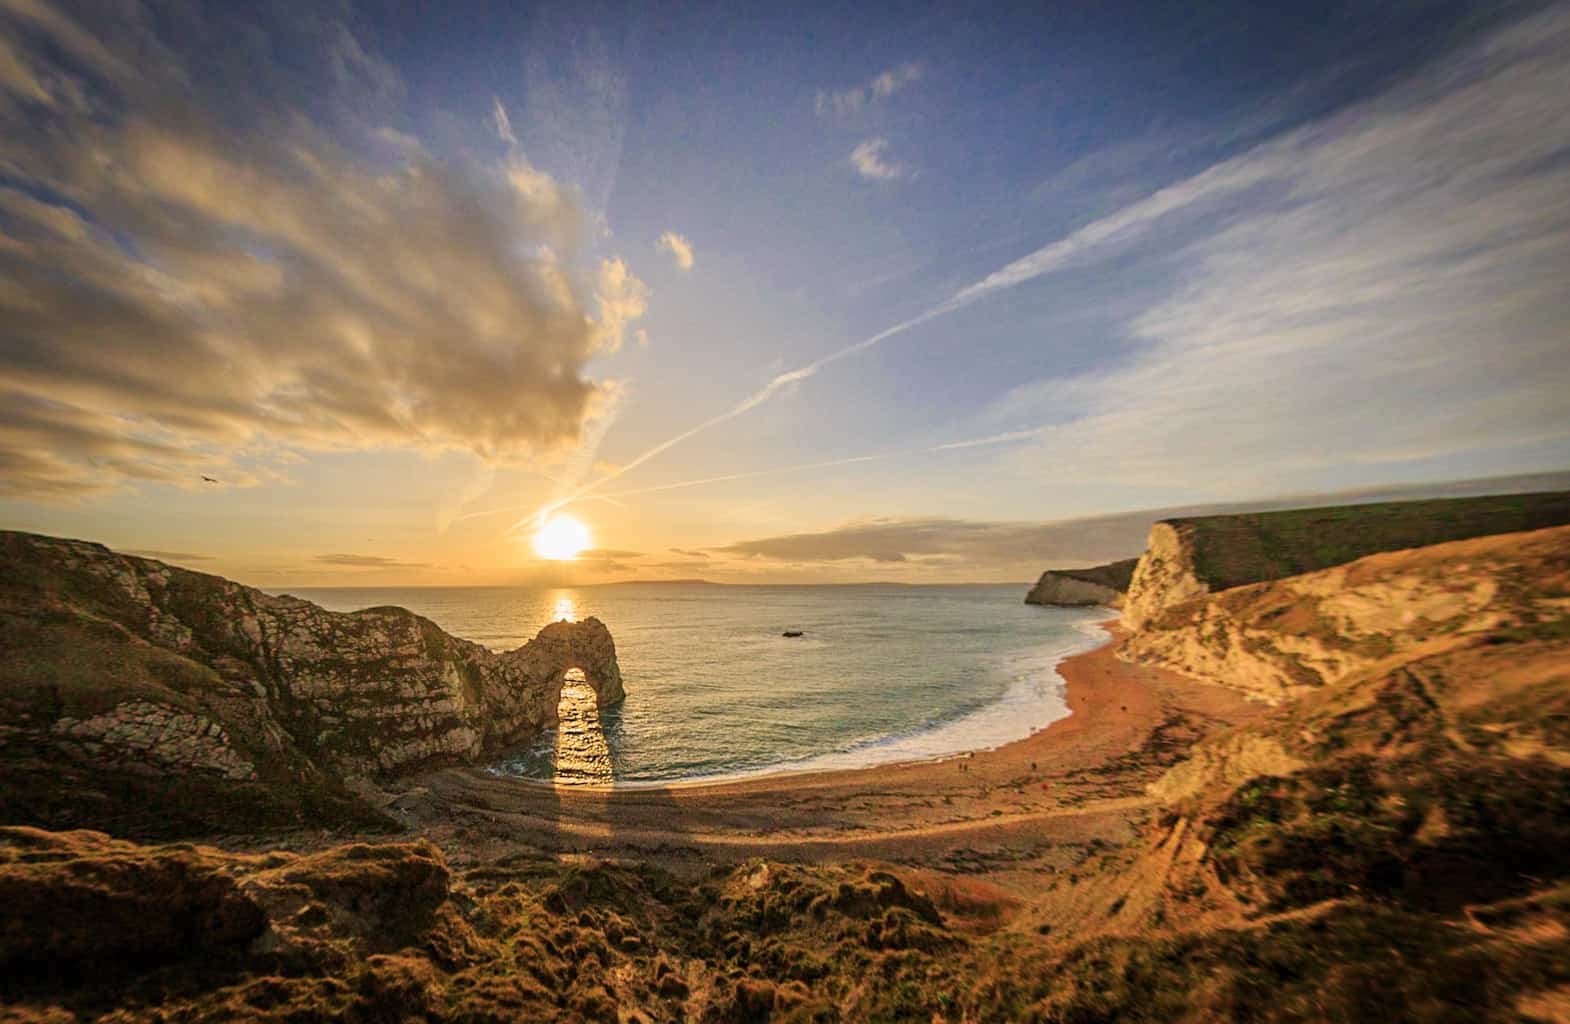  Durdle Door at sunset by Rick McEvoy 